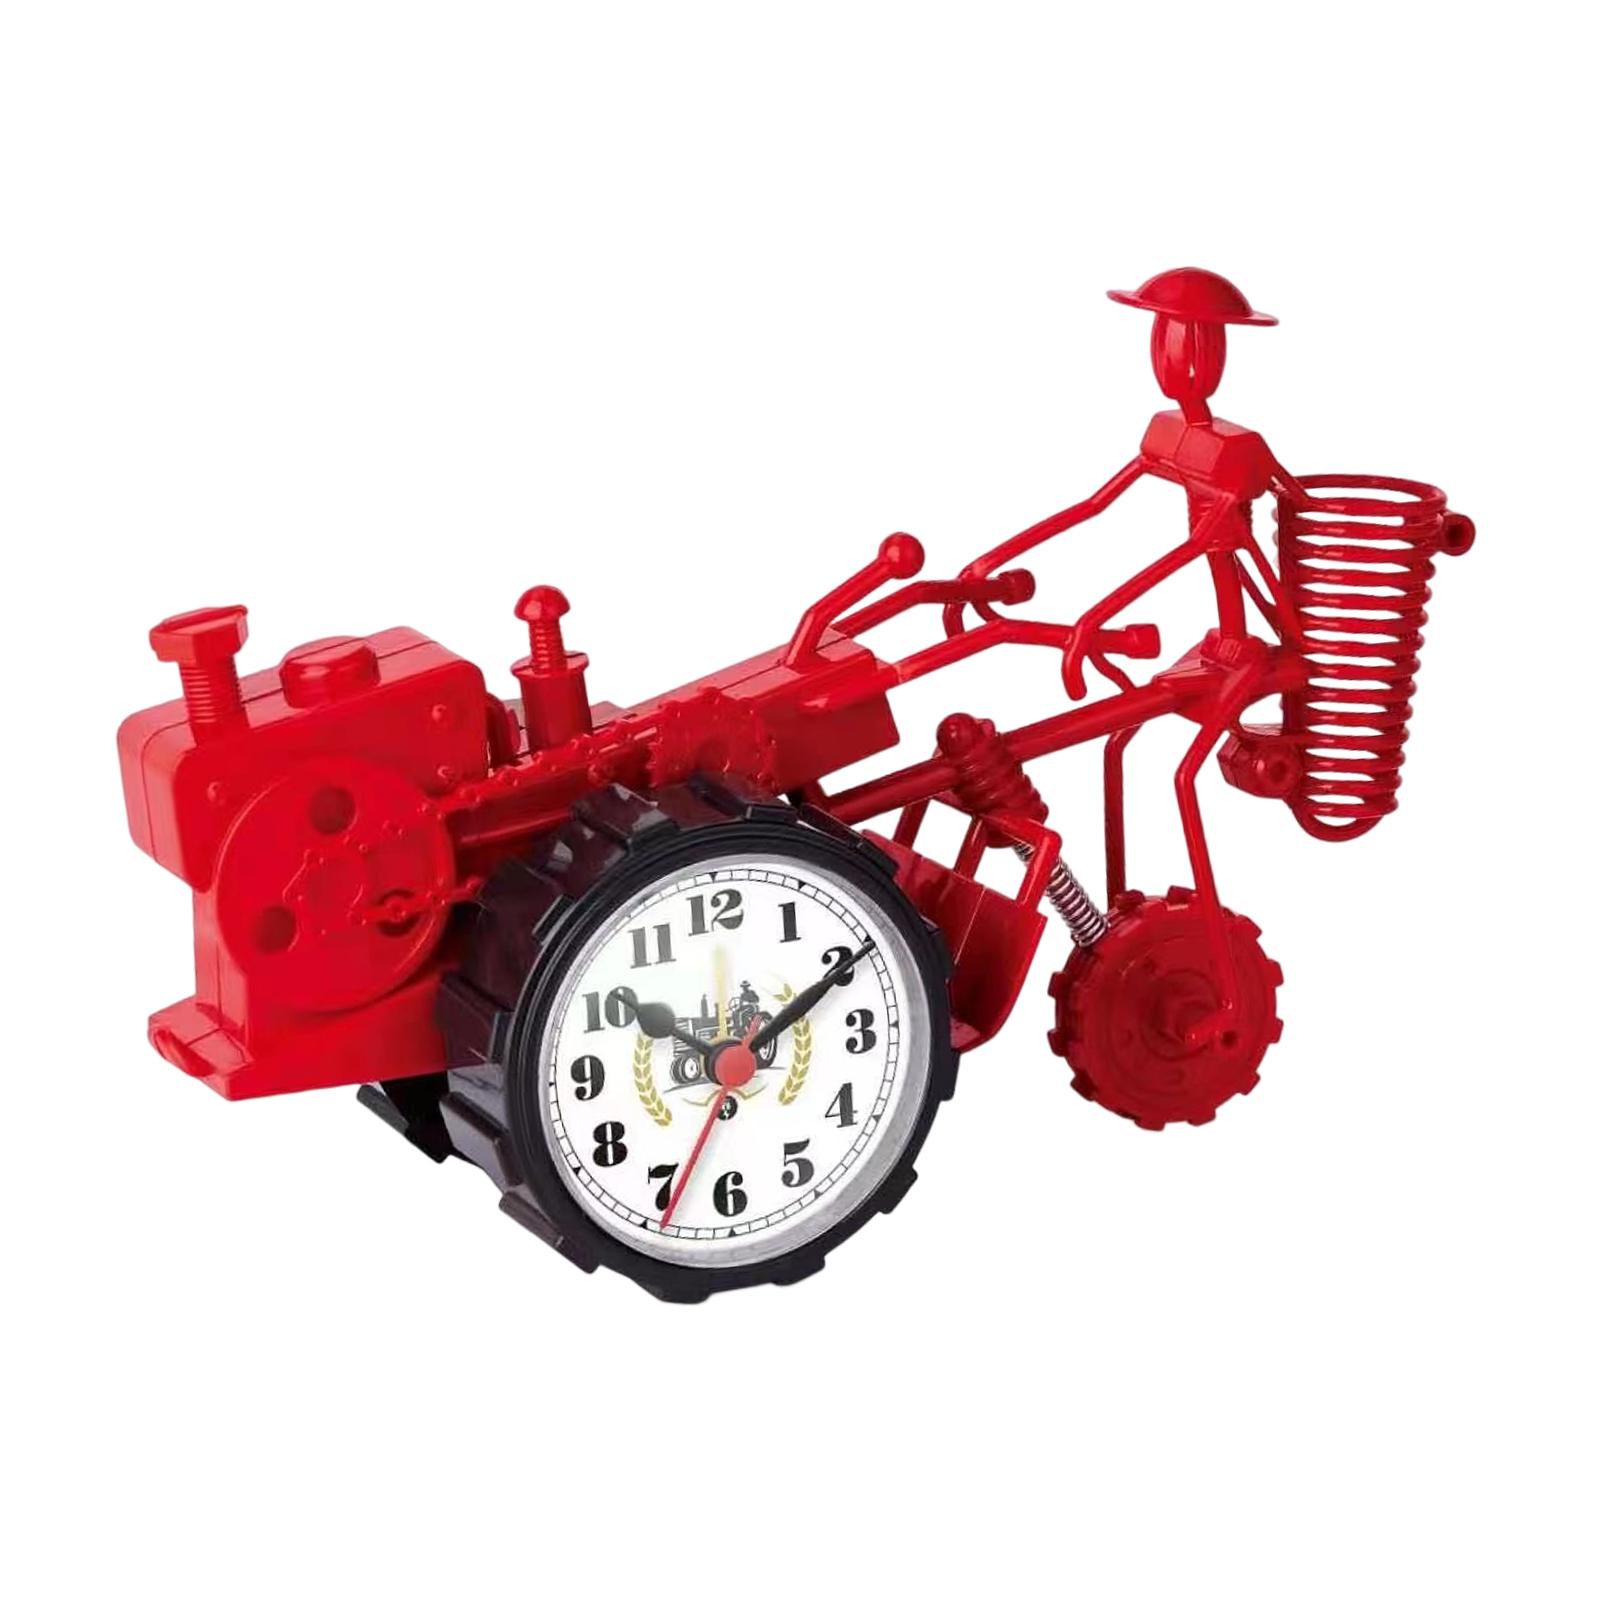 Rustic Desk Clock Tractor Model Dormitory Living Room for Kids Decorative Red